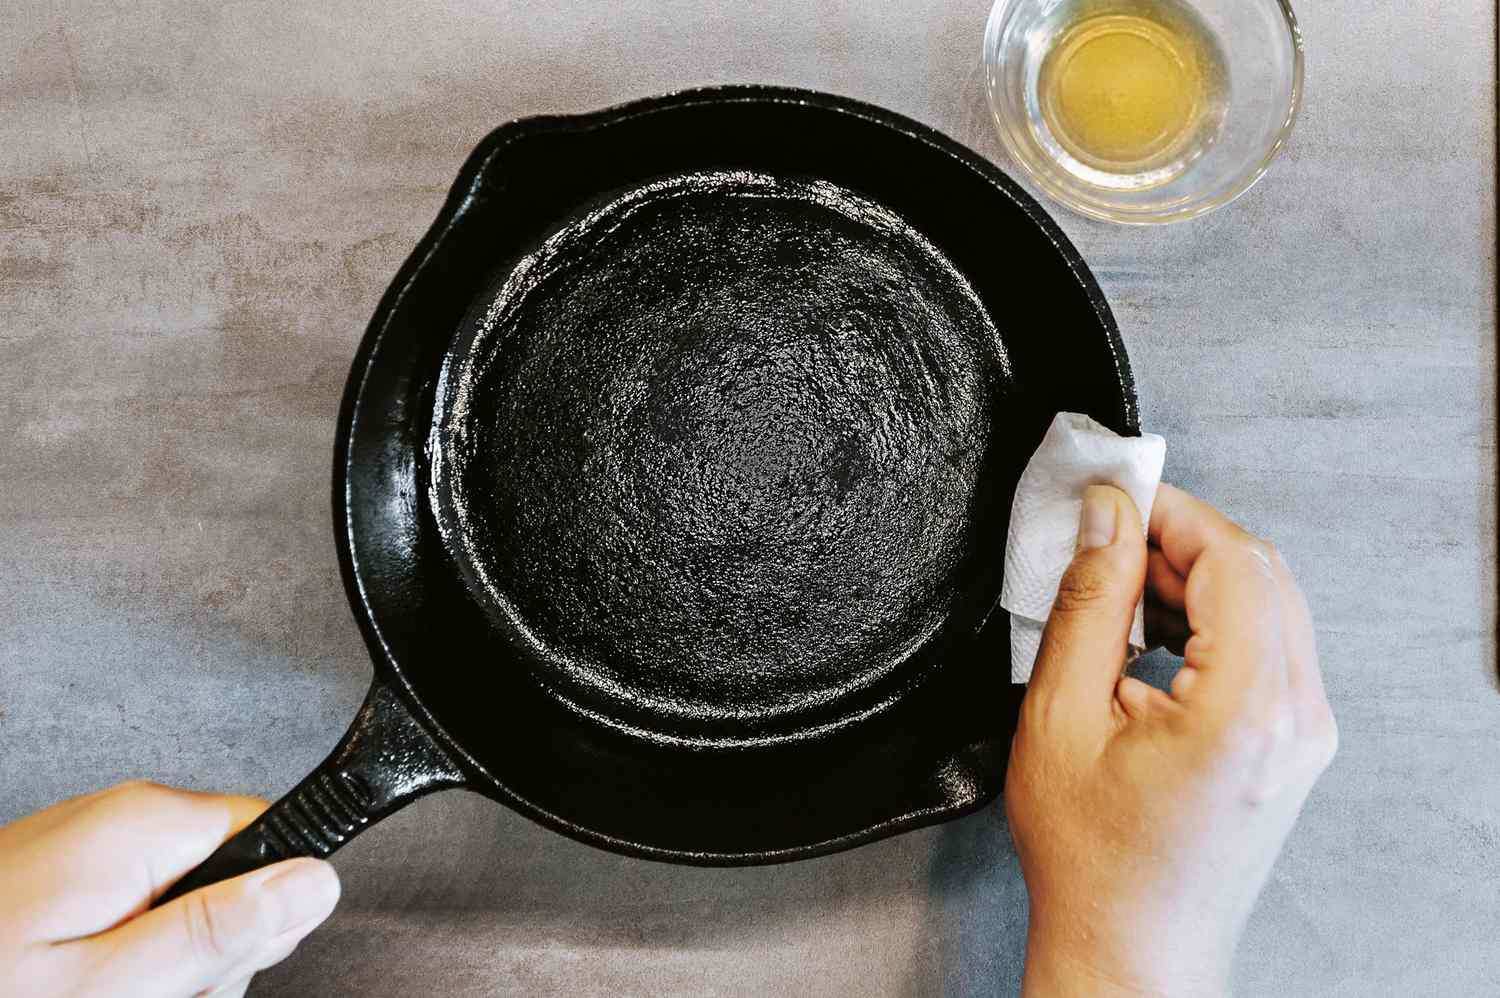 Seasoning a cast iron griddle